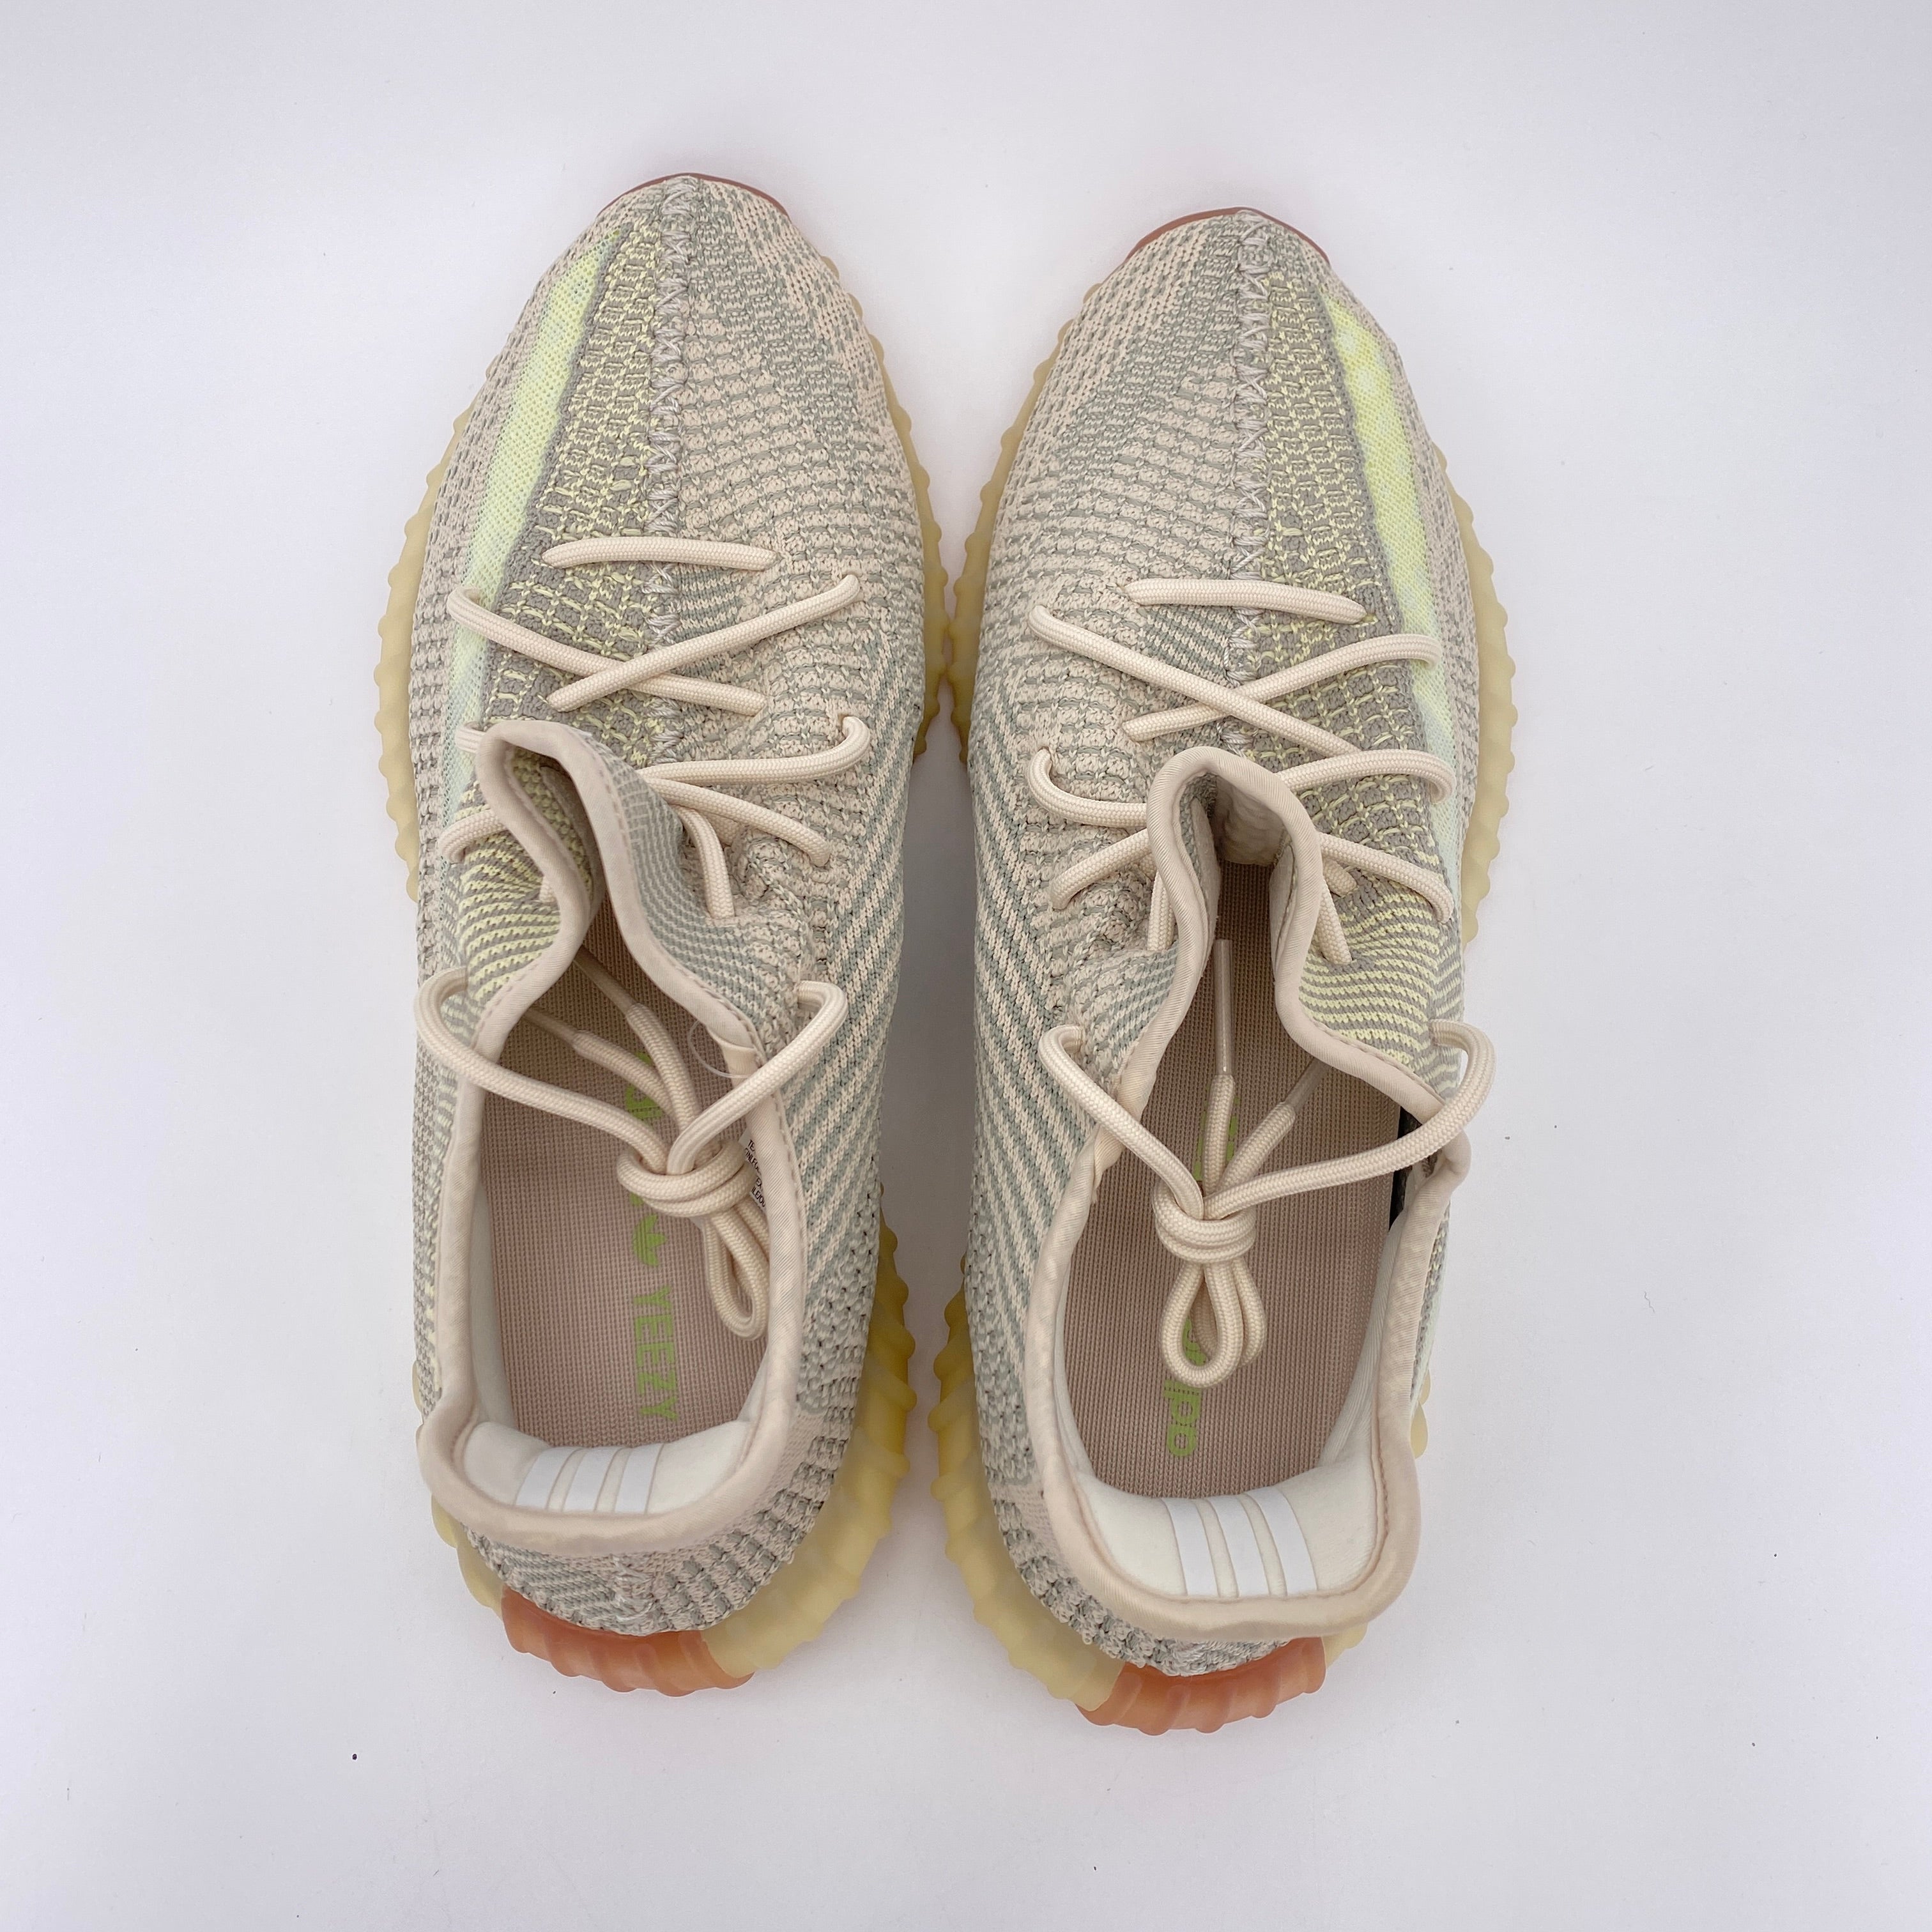 Yeezy 350 v2 &quot;Citrin&quot; 2019 New Size 13